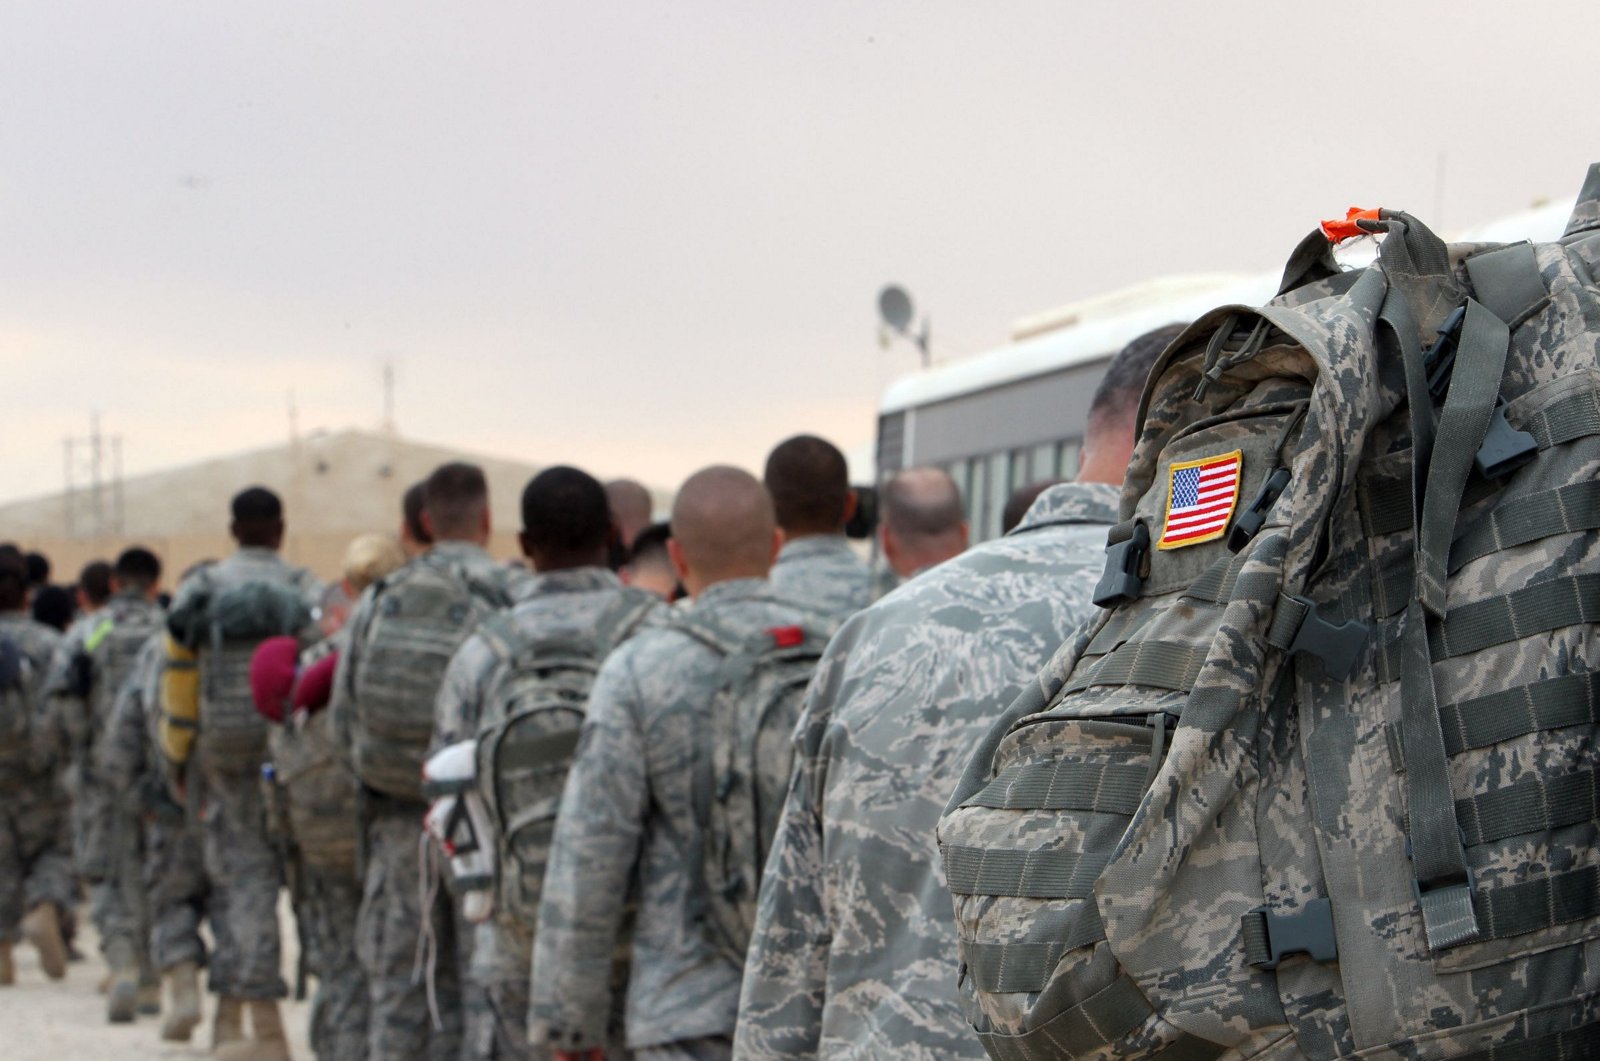 U.S. Army soldiers queue to board a plane to begin their journey home out of Iraq from the al-Asad Air Base west the capital Baghdad, on Nov. 1, 2011. (AFP File Photo)